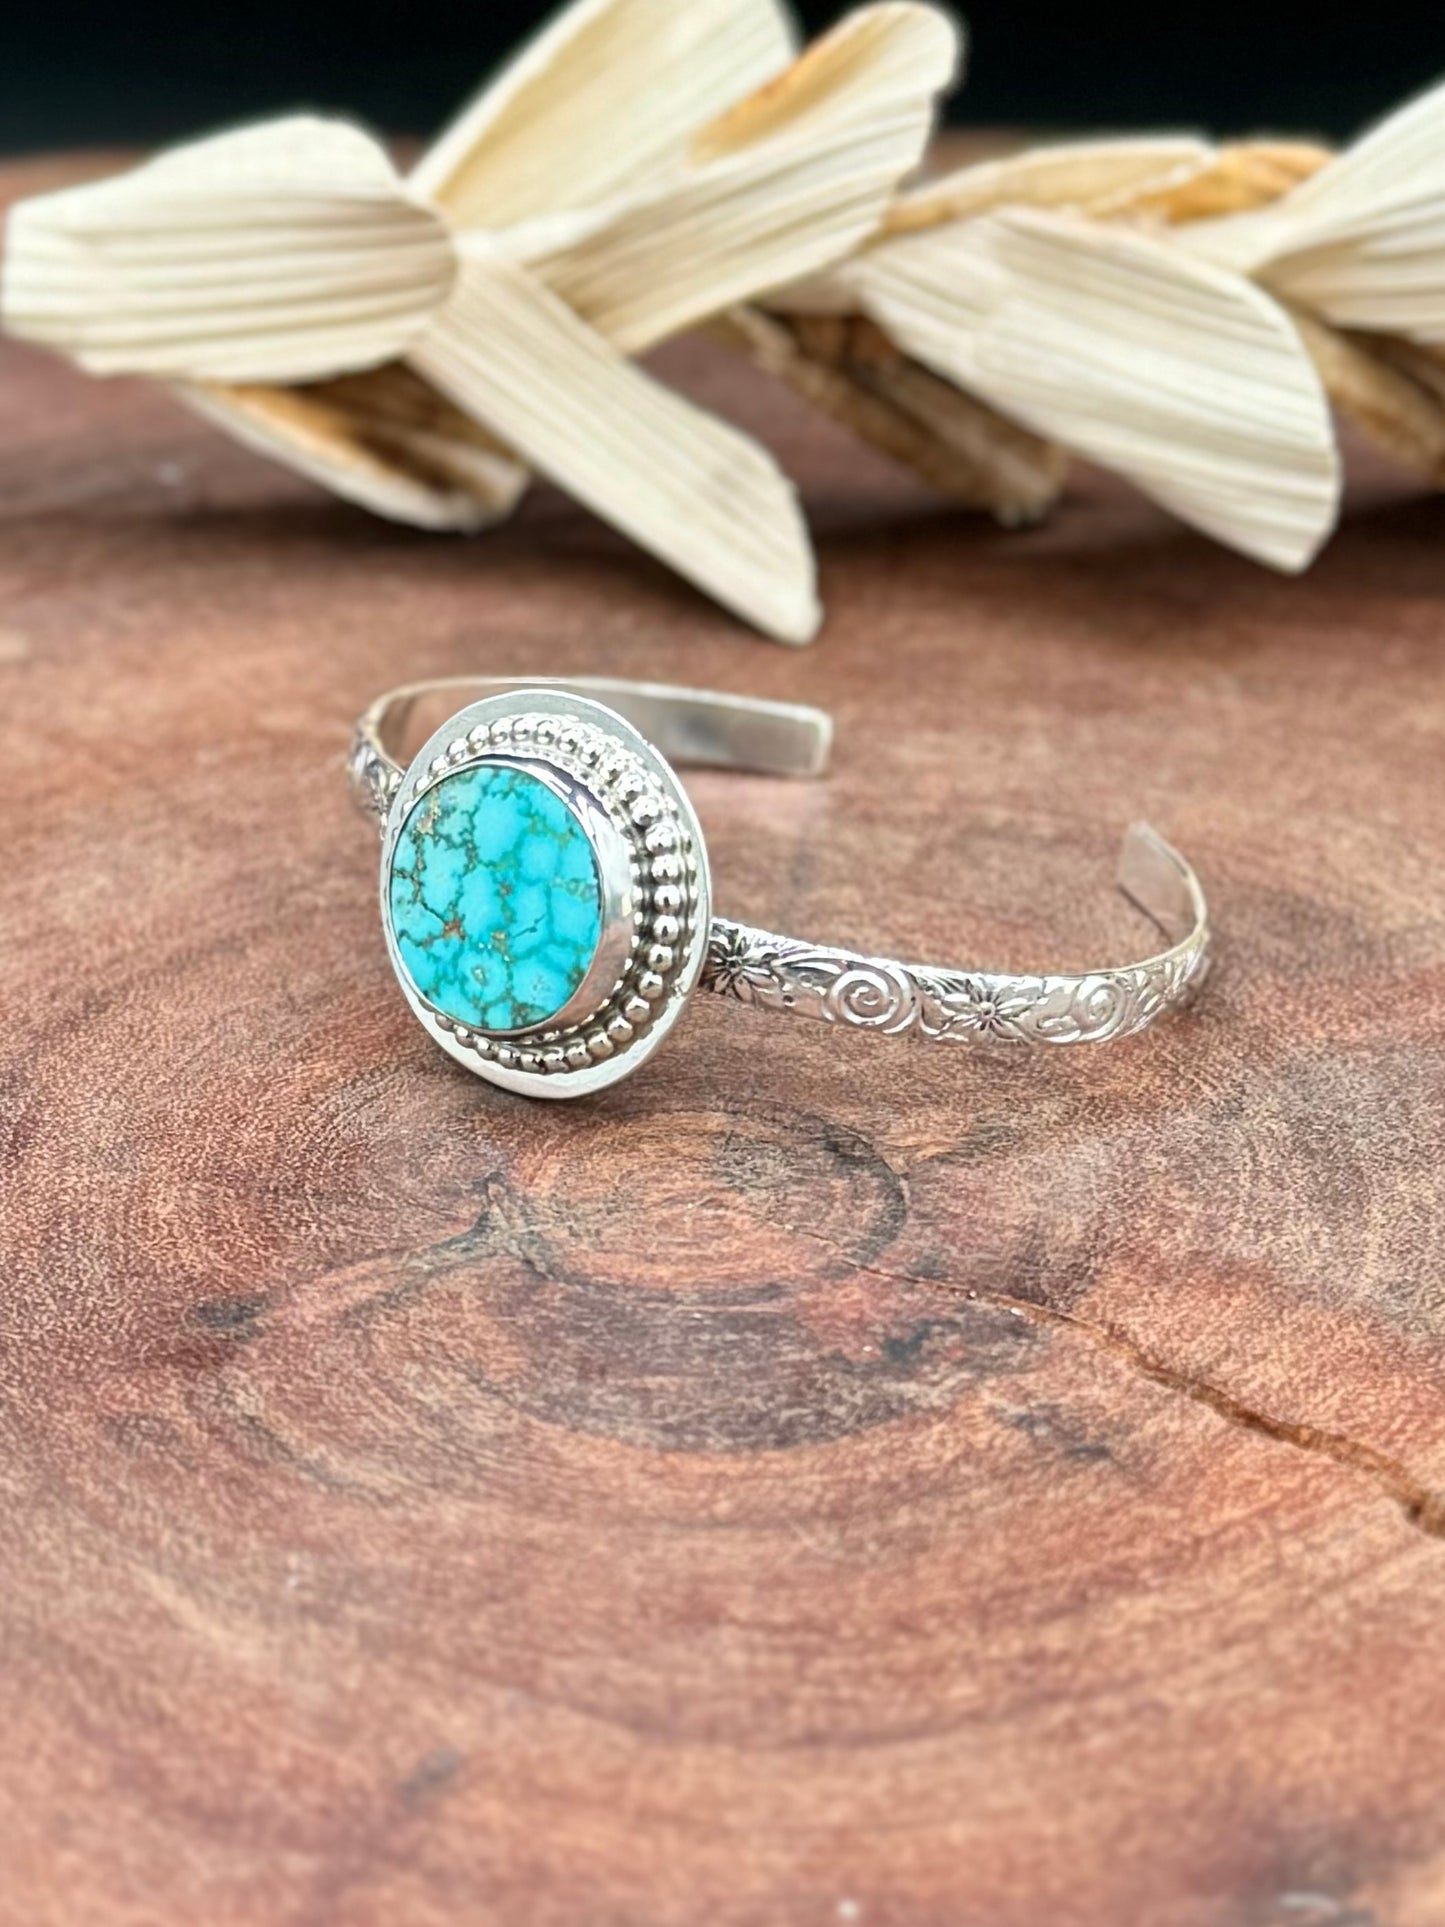 Natural Mountain Turquoise Sterling Silver Patterned Cuff